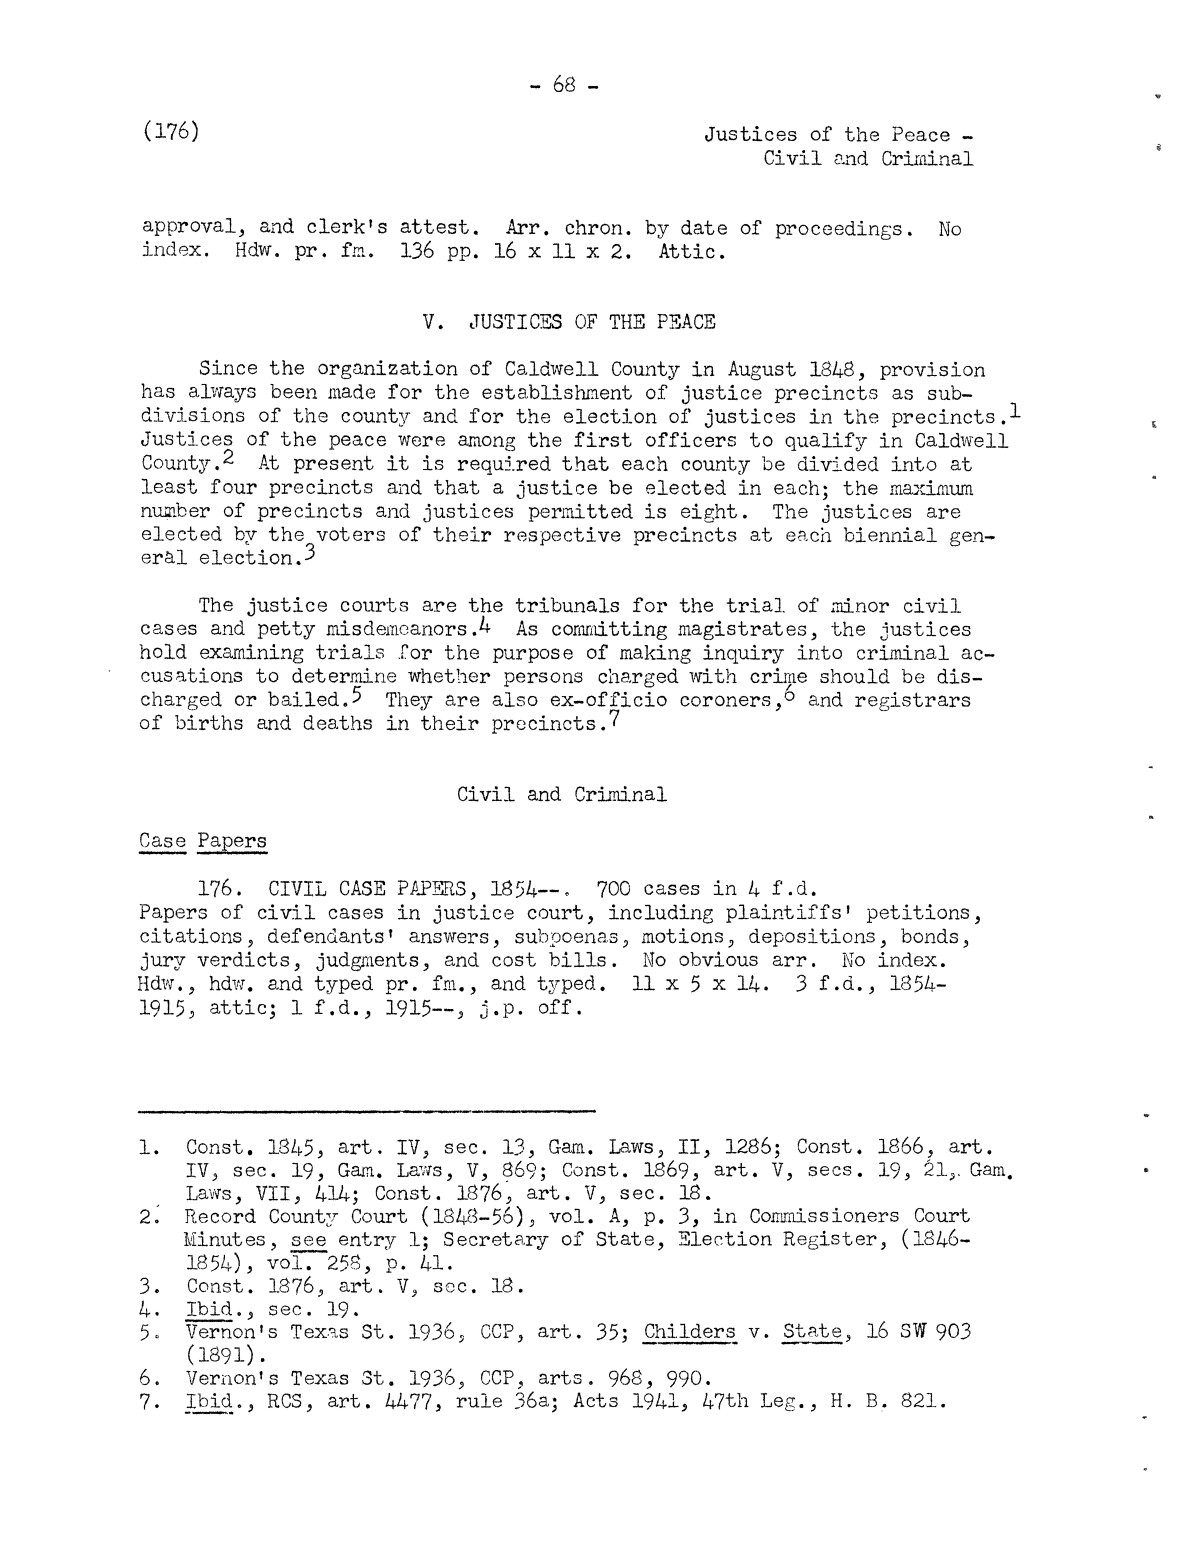 Inventory of the county archives of Texas : Caldwell County, no. 28
                                                
                                                    68
                                                